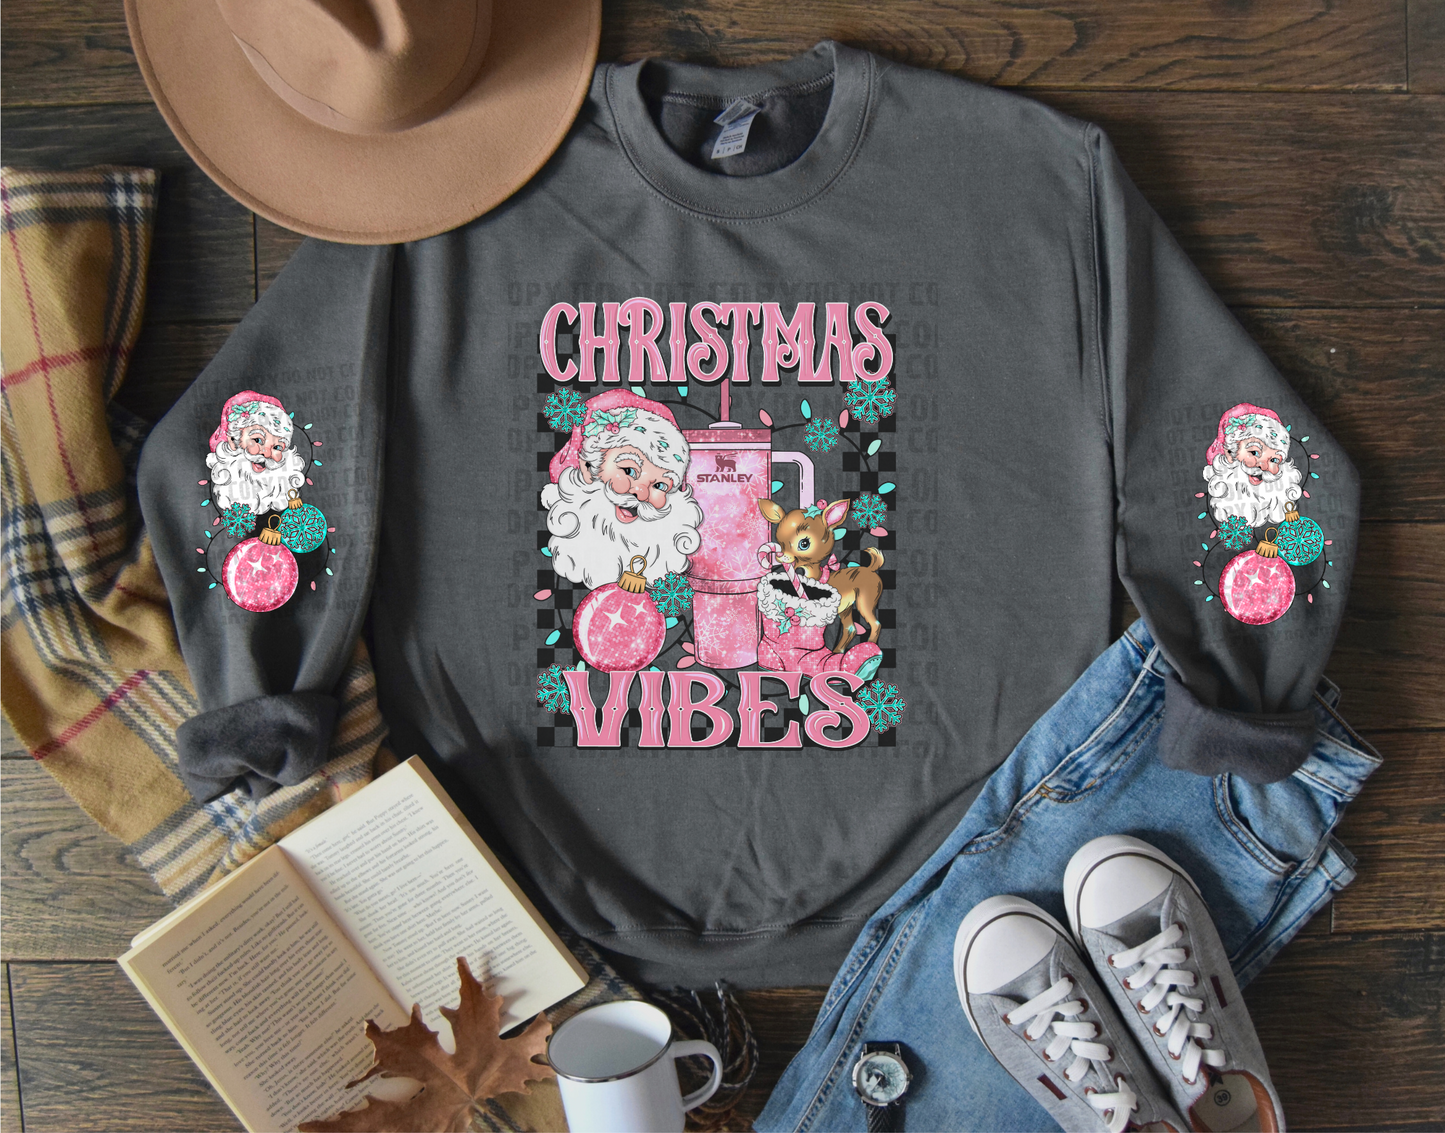 Christmas Vibes Sweat Shirt | Trendy Christmas Hoodie with Sleeves| Fast Shipping | Super Soft Shirts for Women